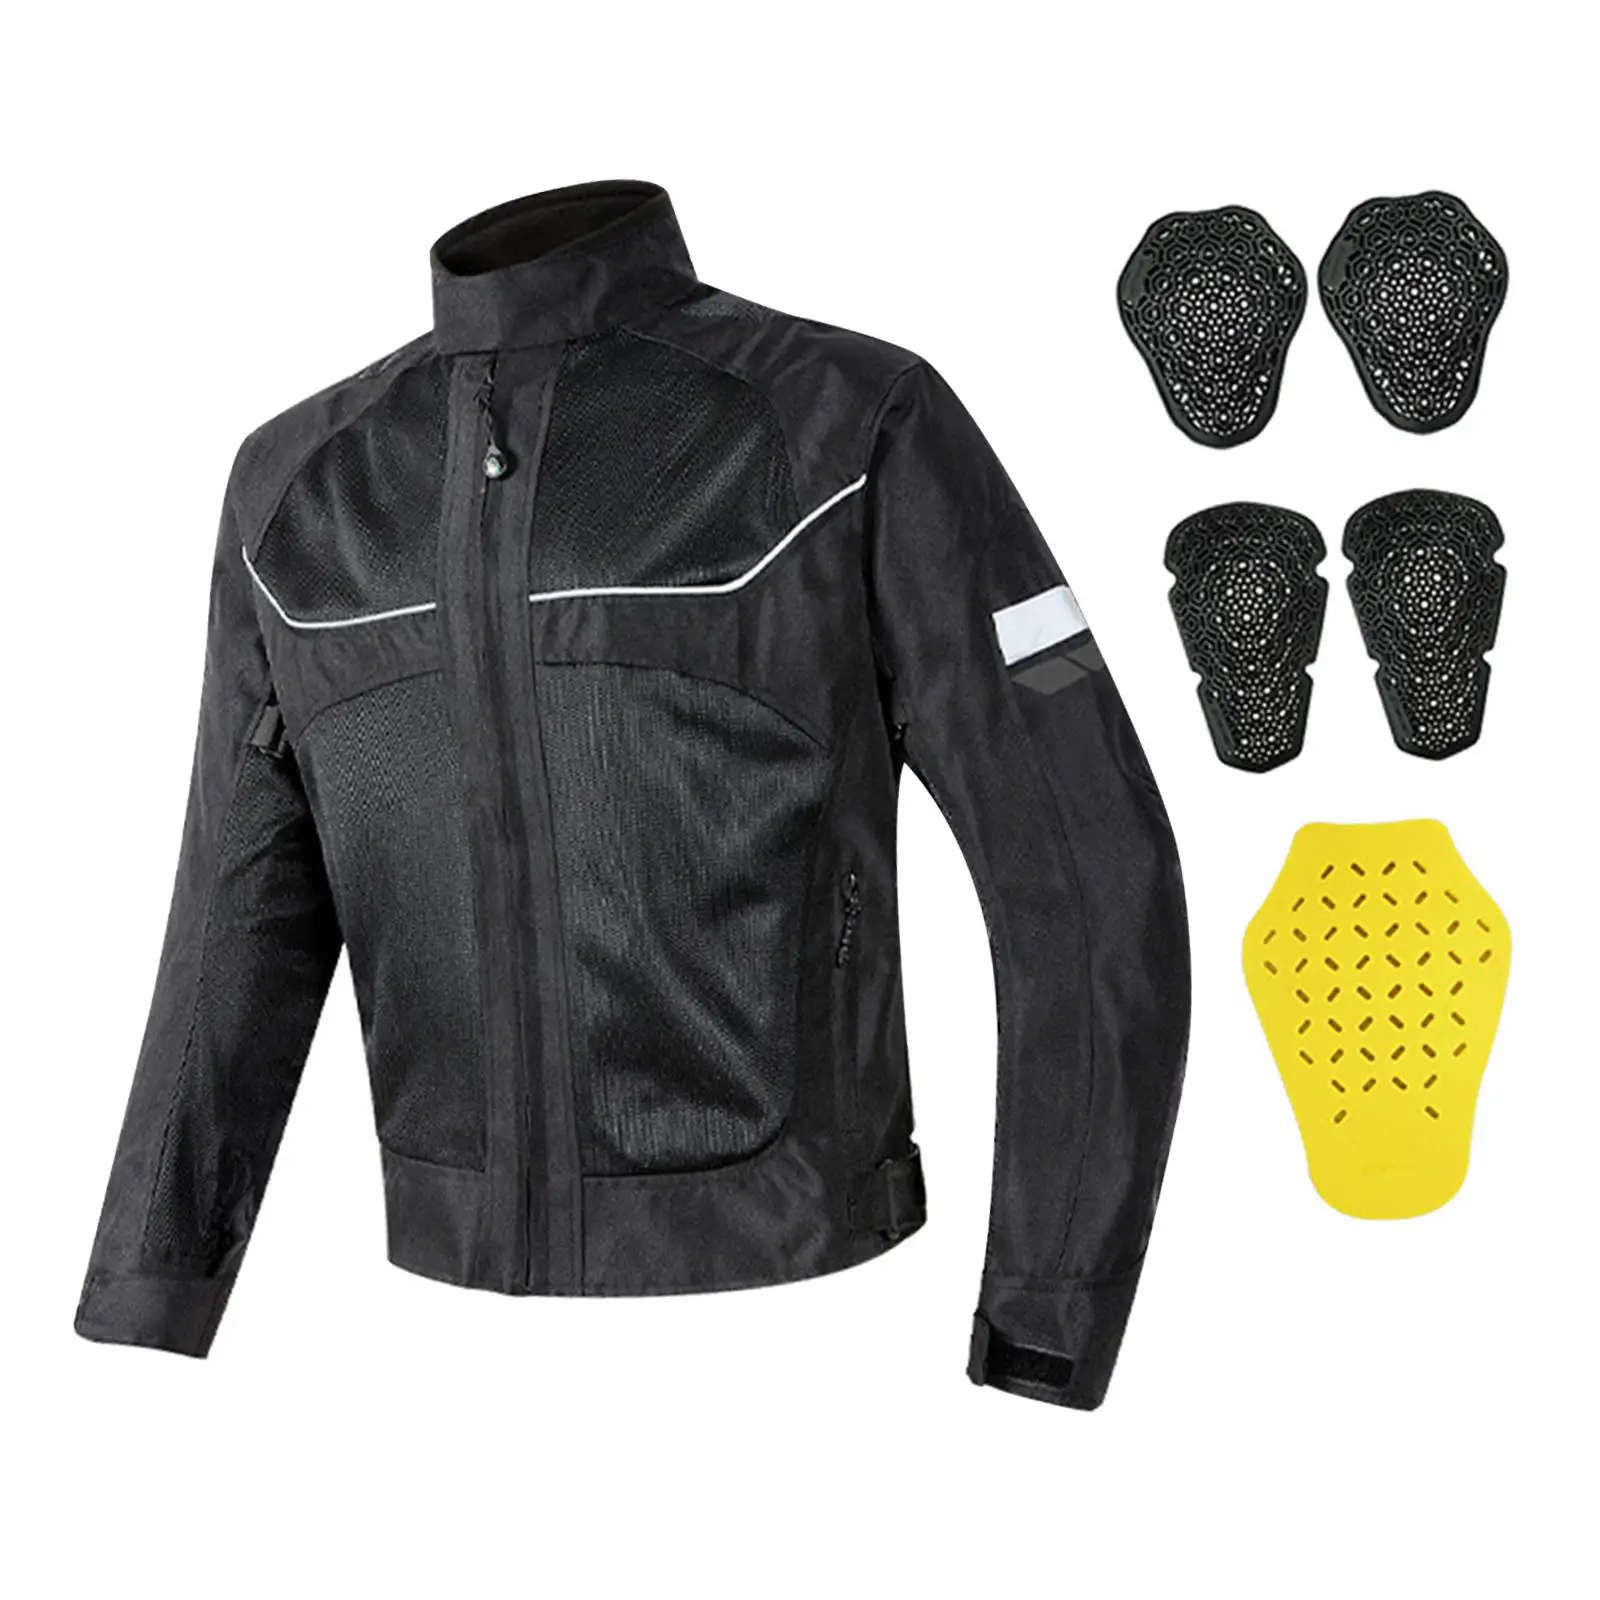 Summer Motorcycle Jacket Breathable Reflective Protection Armor Motocross Jacket